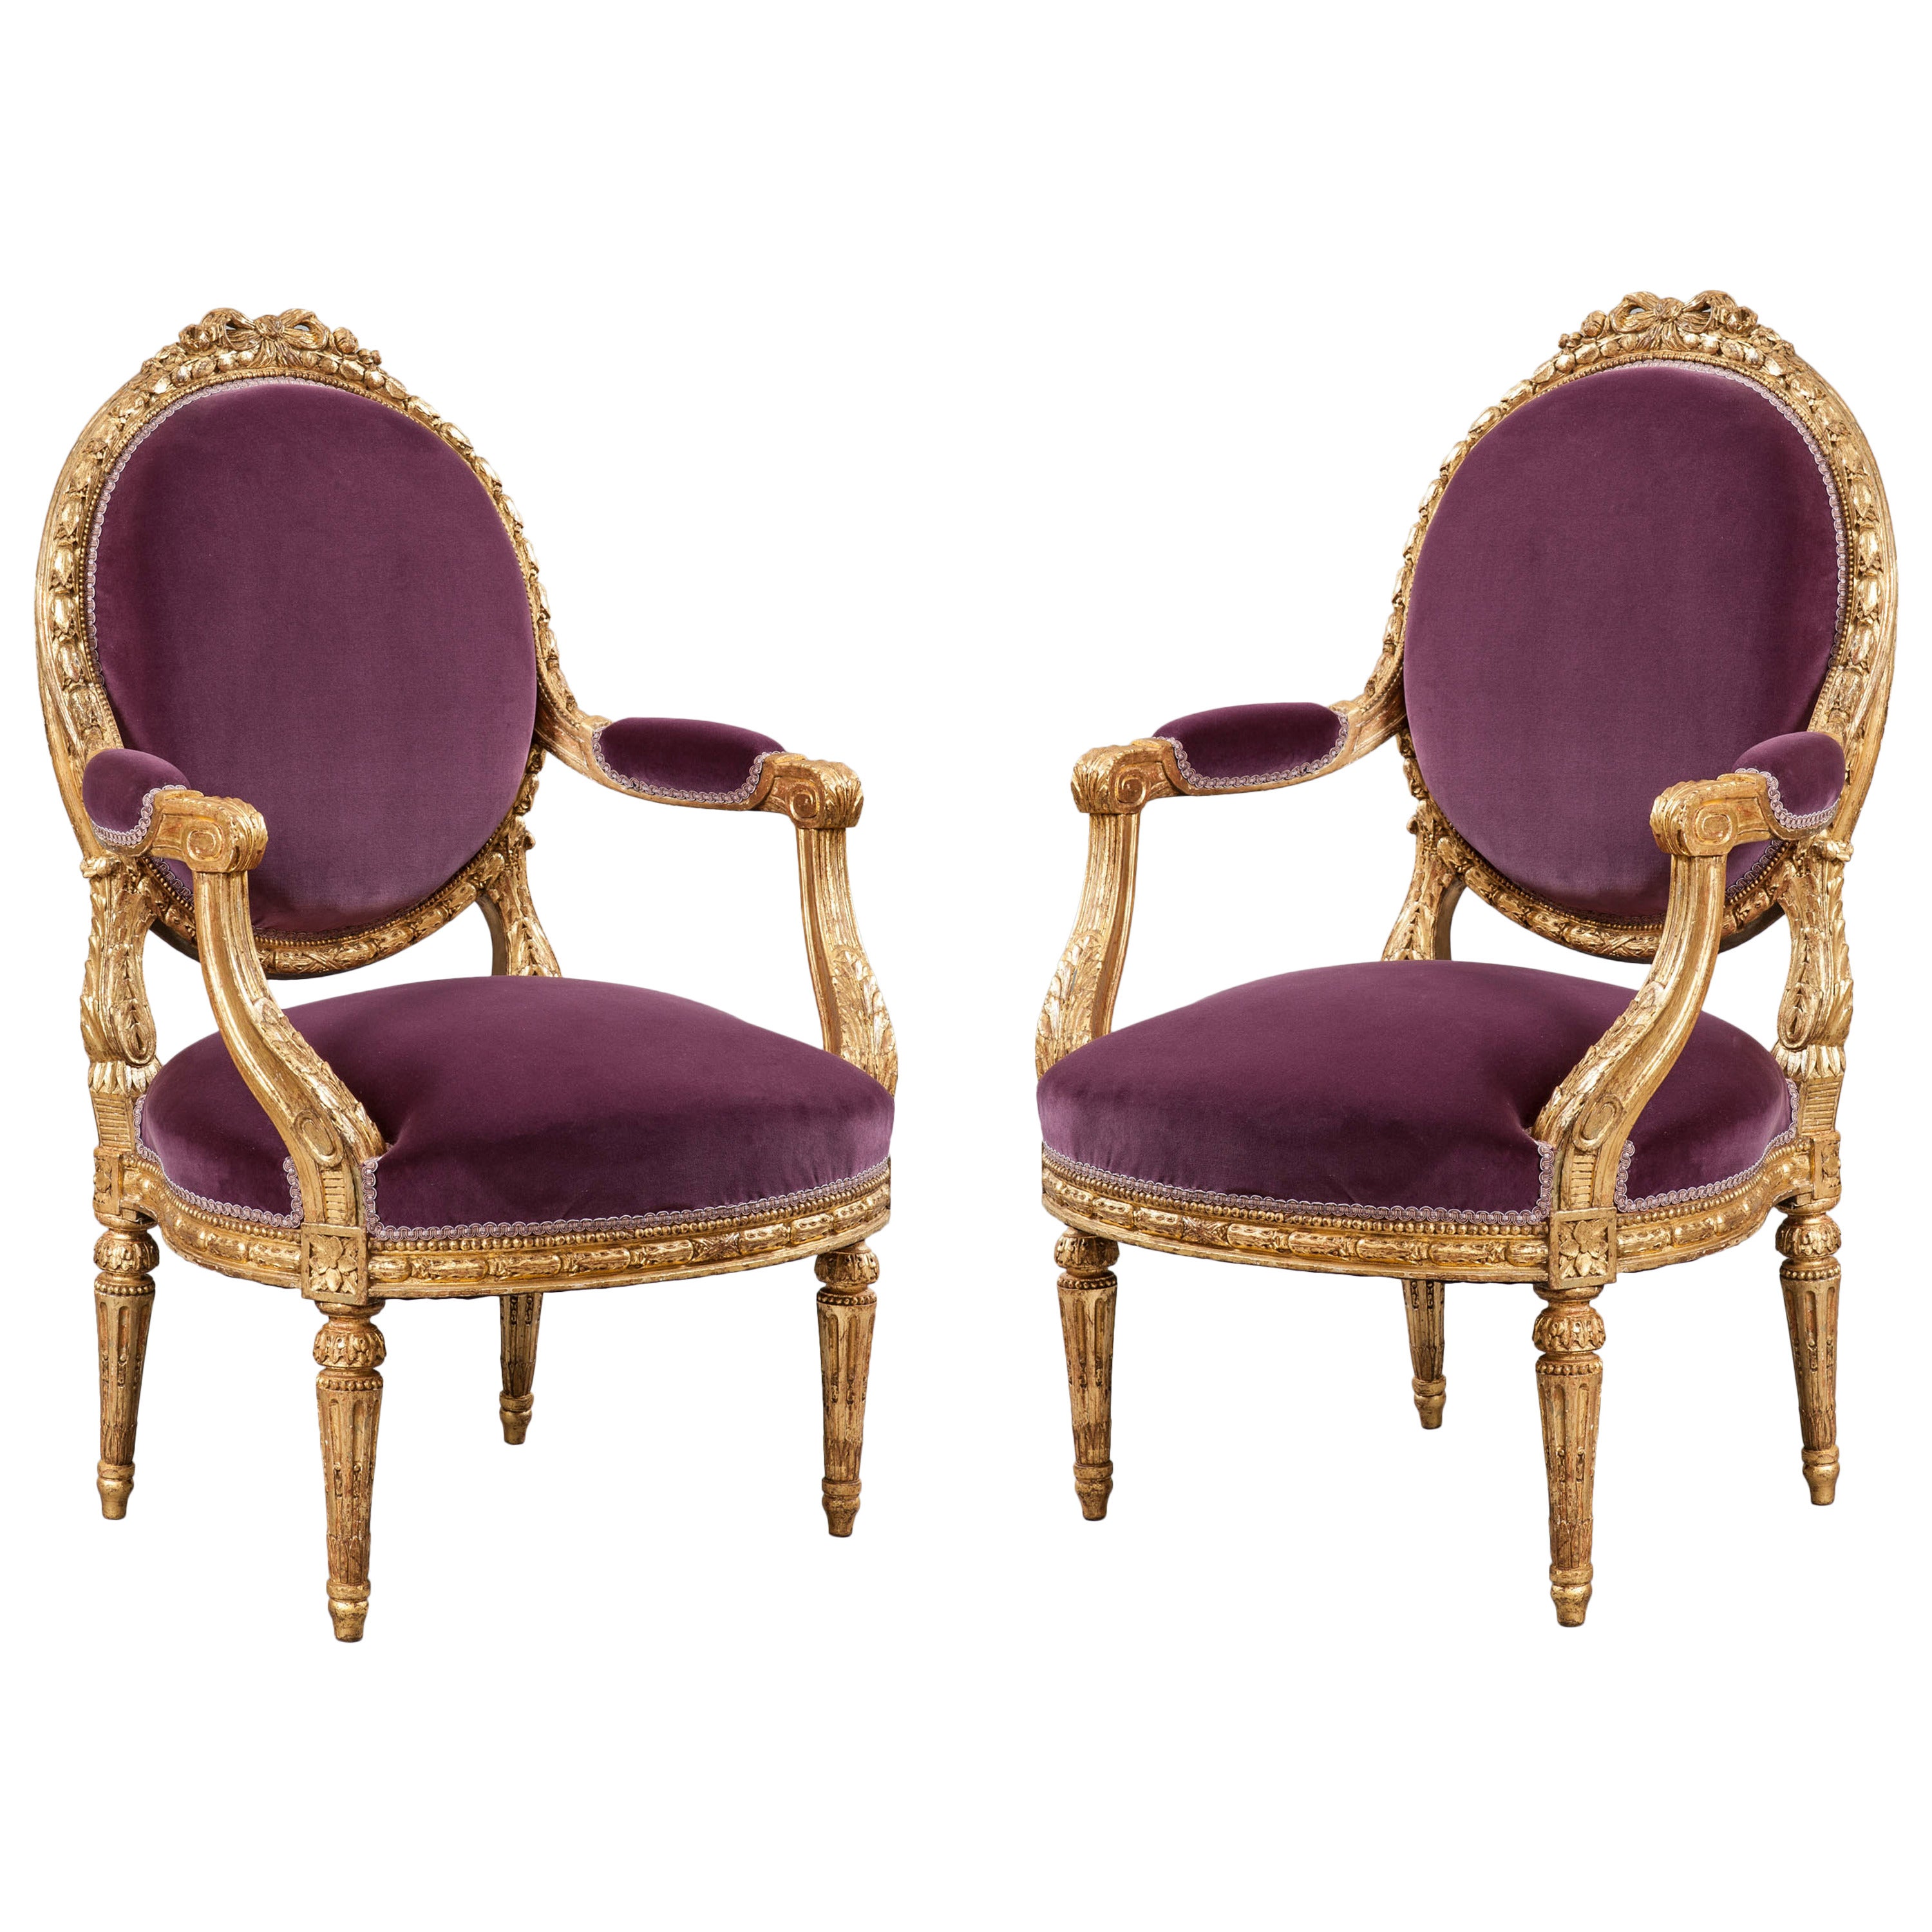 Pair of 19th Century French Giltwood and Purple Velvet Armchairs